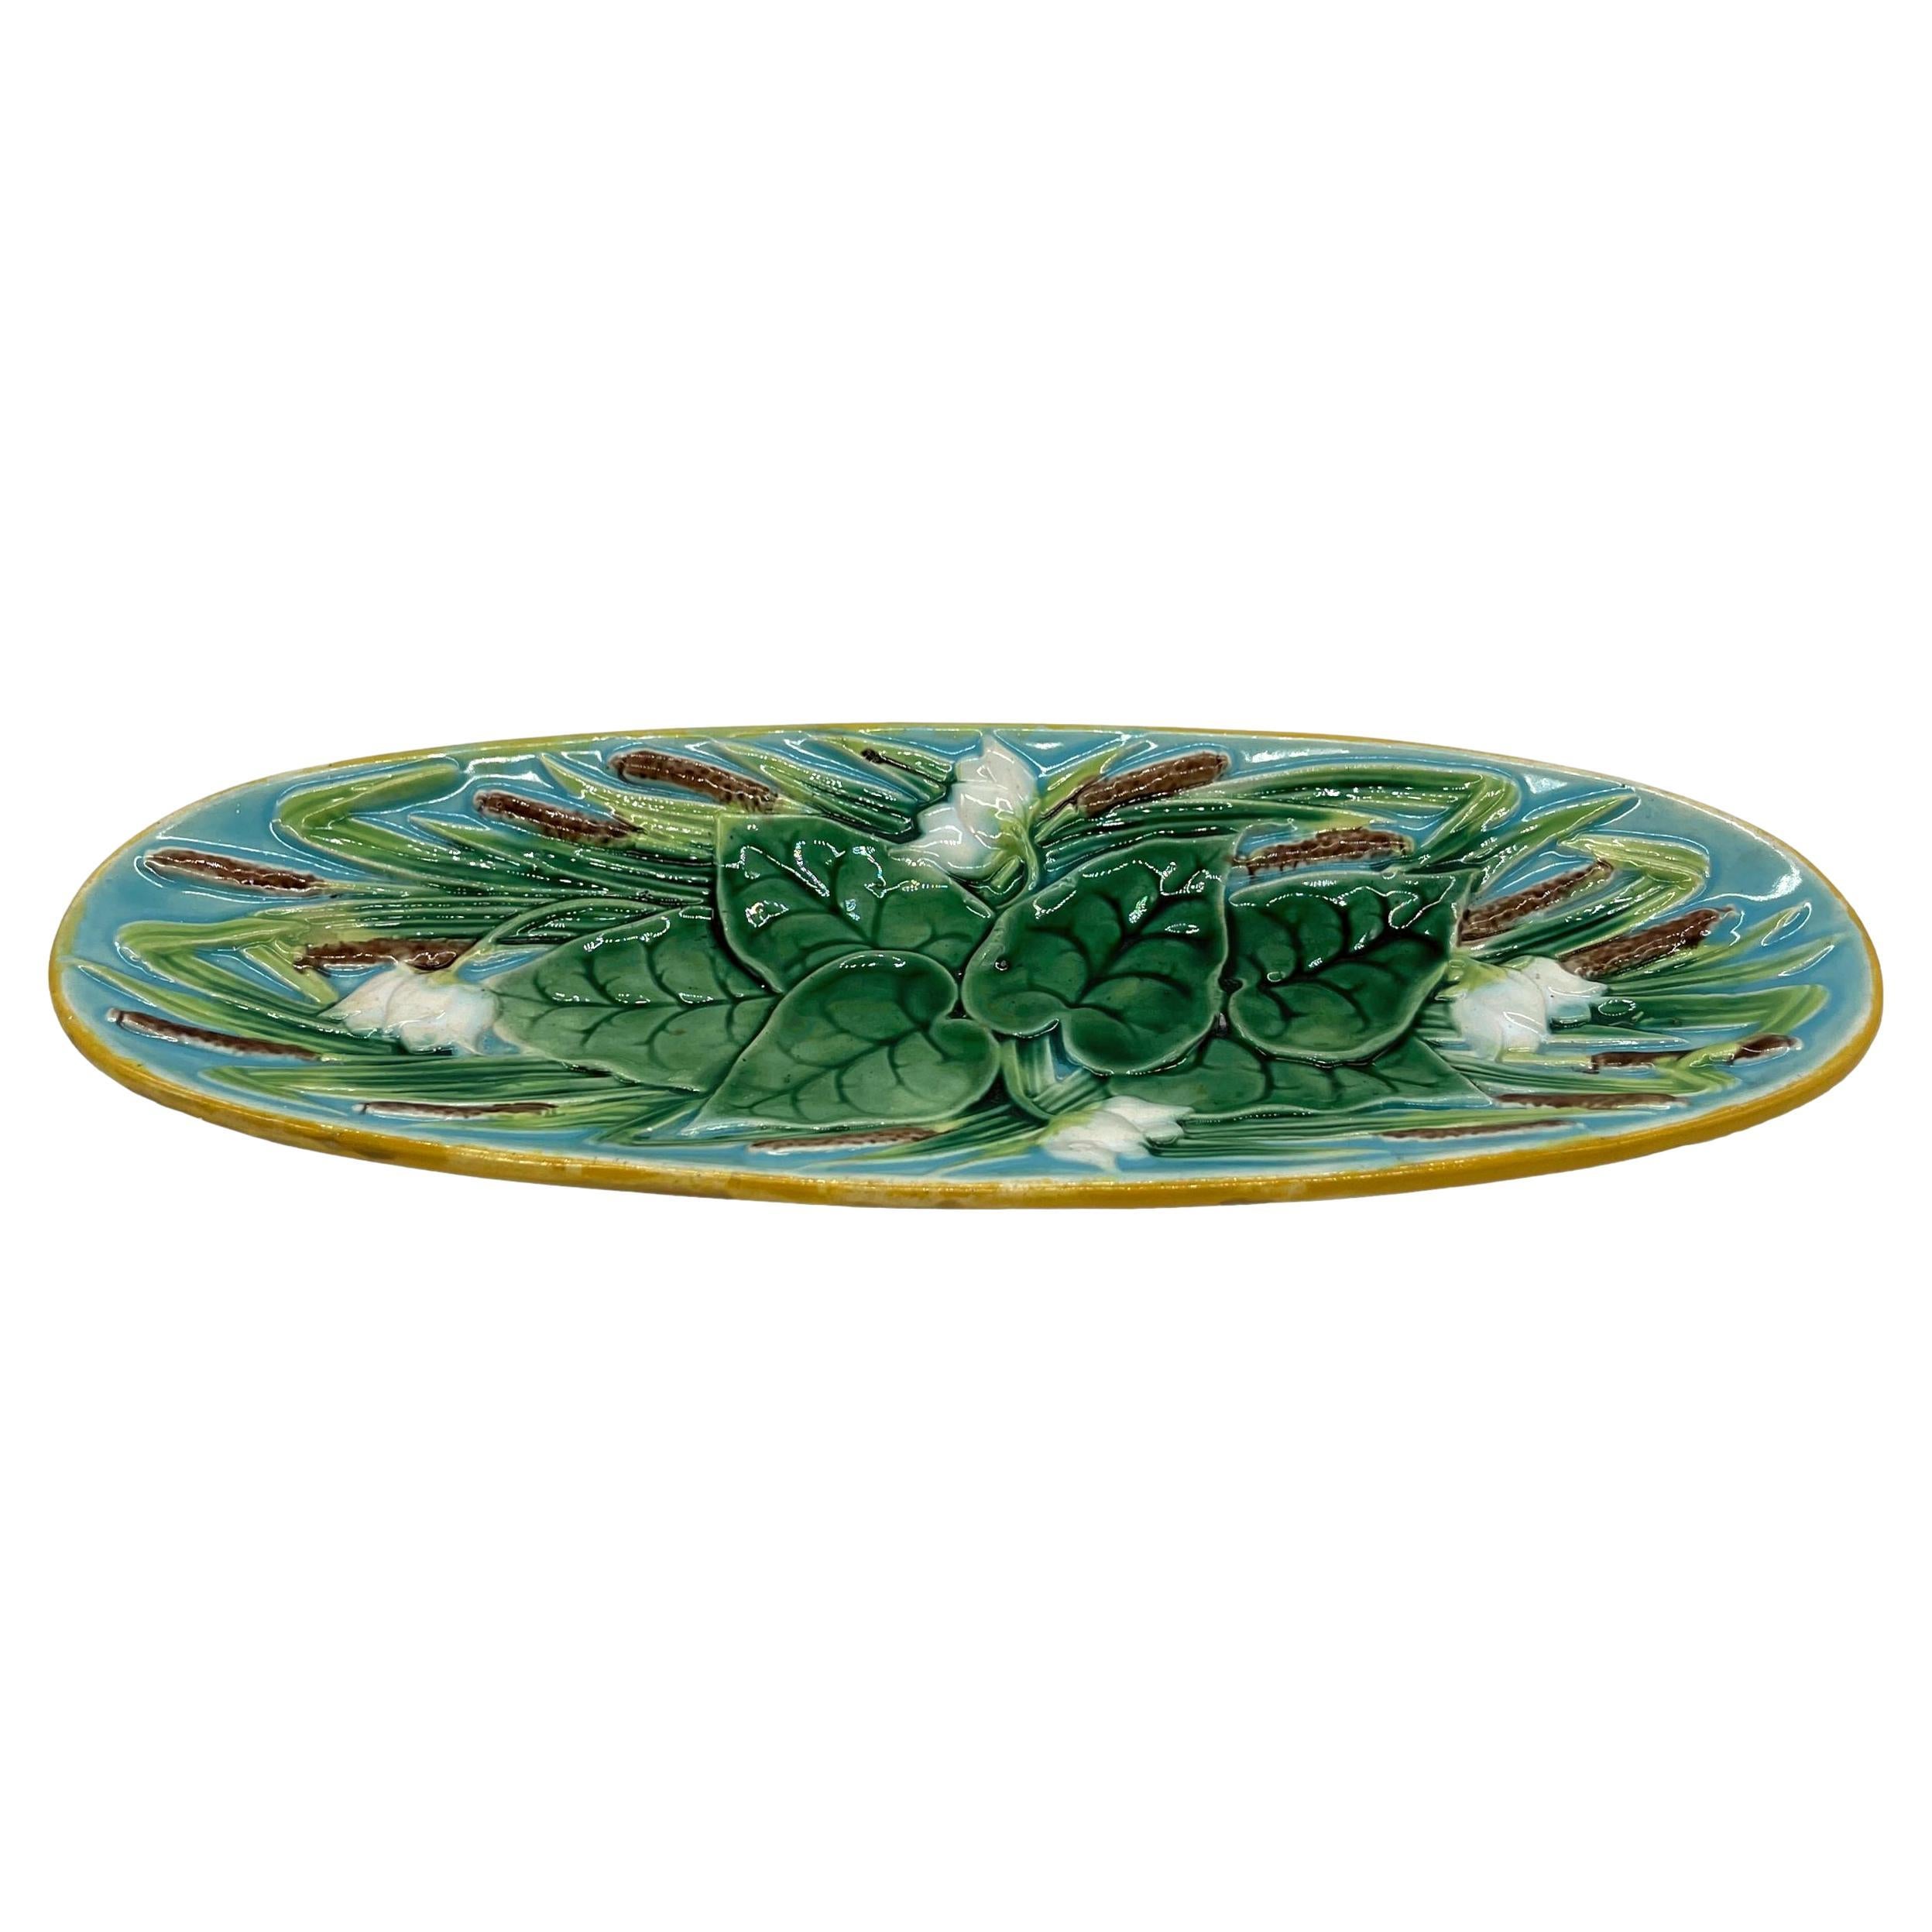 A George Jones Majolica 10-inch Oval Pen Tray, with green-glazed relief-molded lily pads with white blossoms and naturalistically glazed bullrushes on turquoise-glazed water forming the ground, with a yellow ocher rim, the reverse glazed in brown